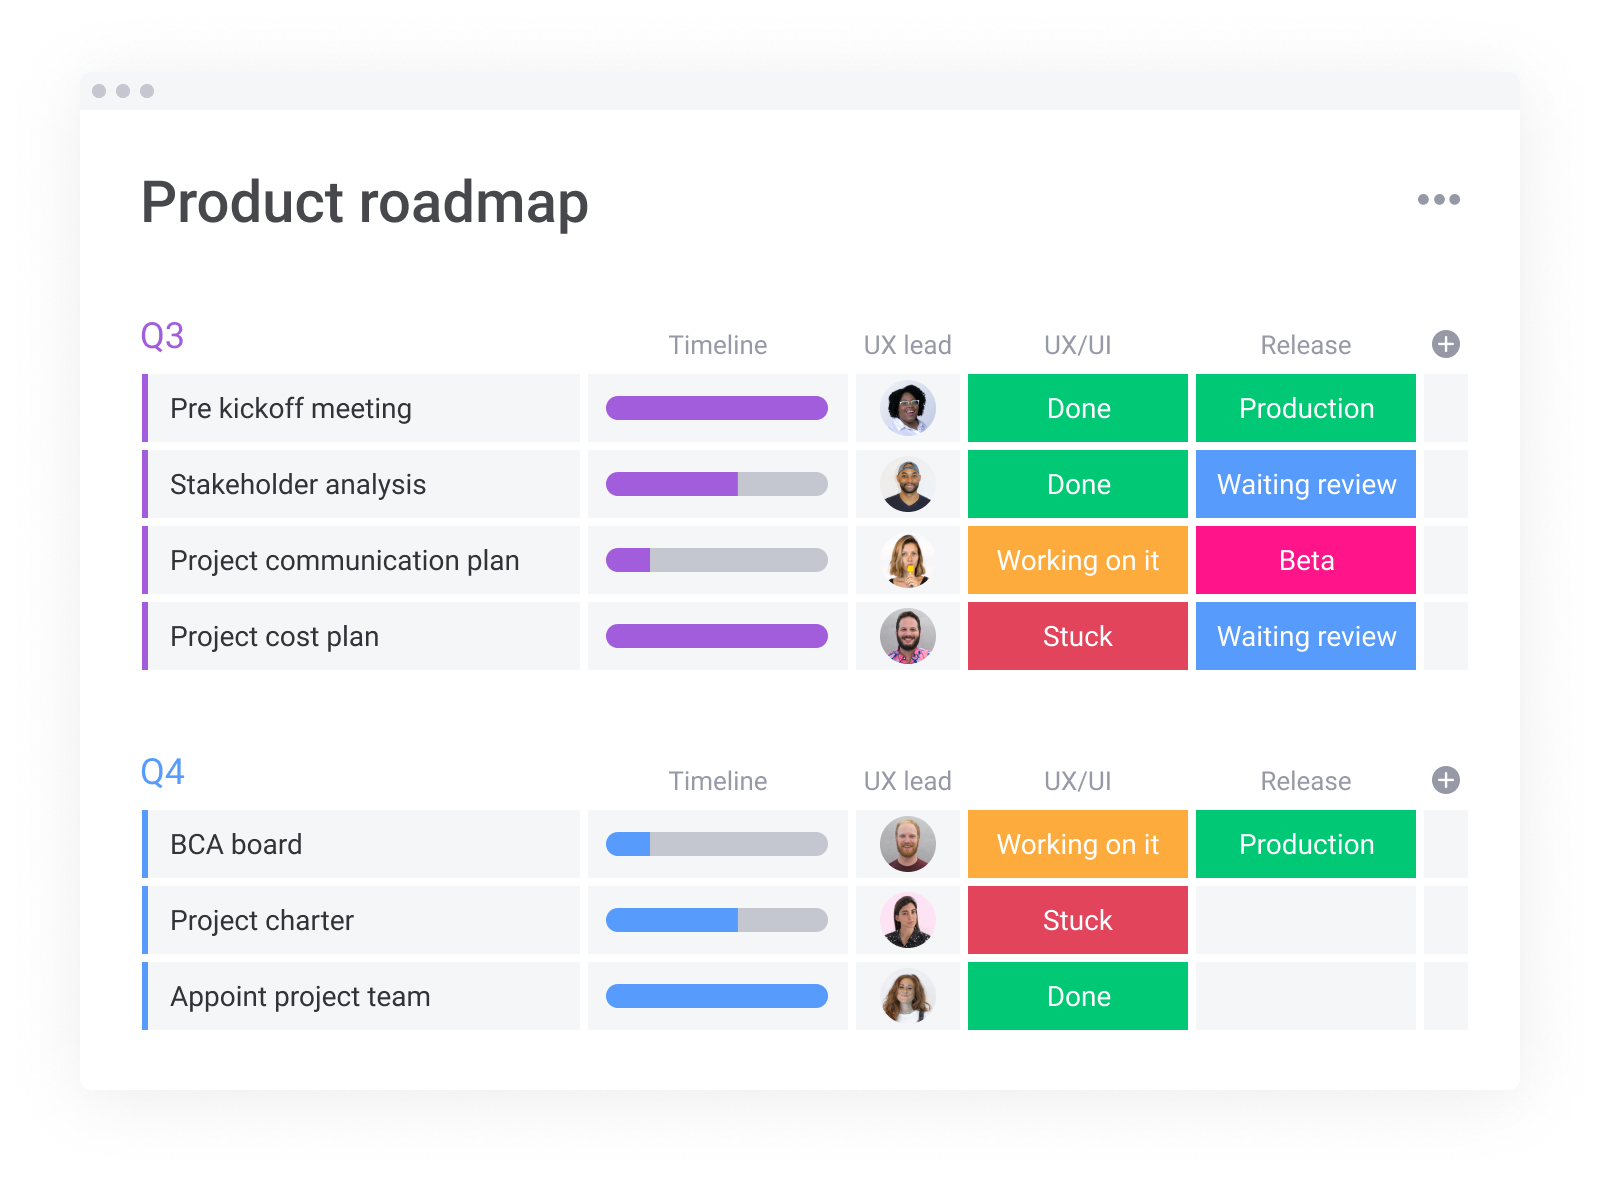 A screenshot showing how to create a software product roadmap which can be used in Agile project management.